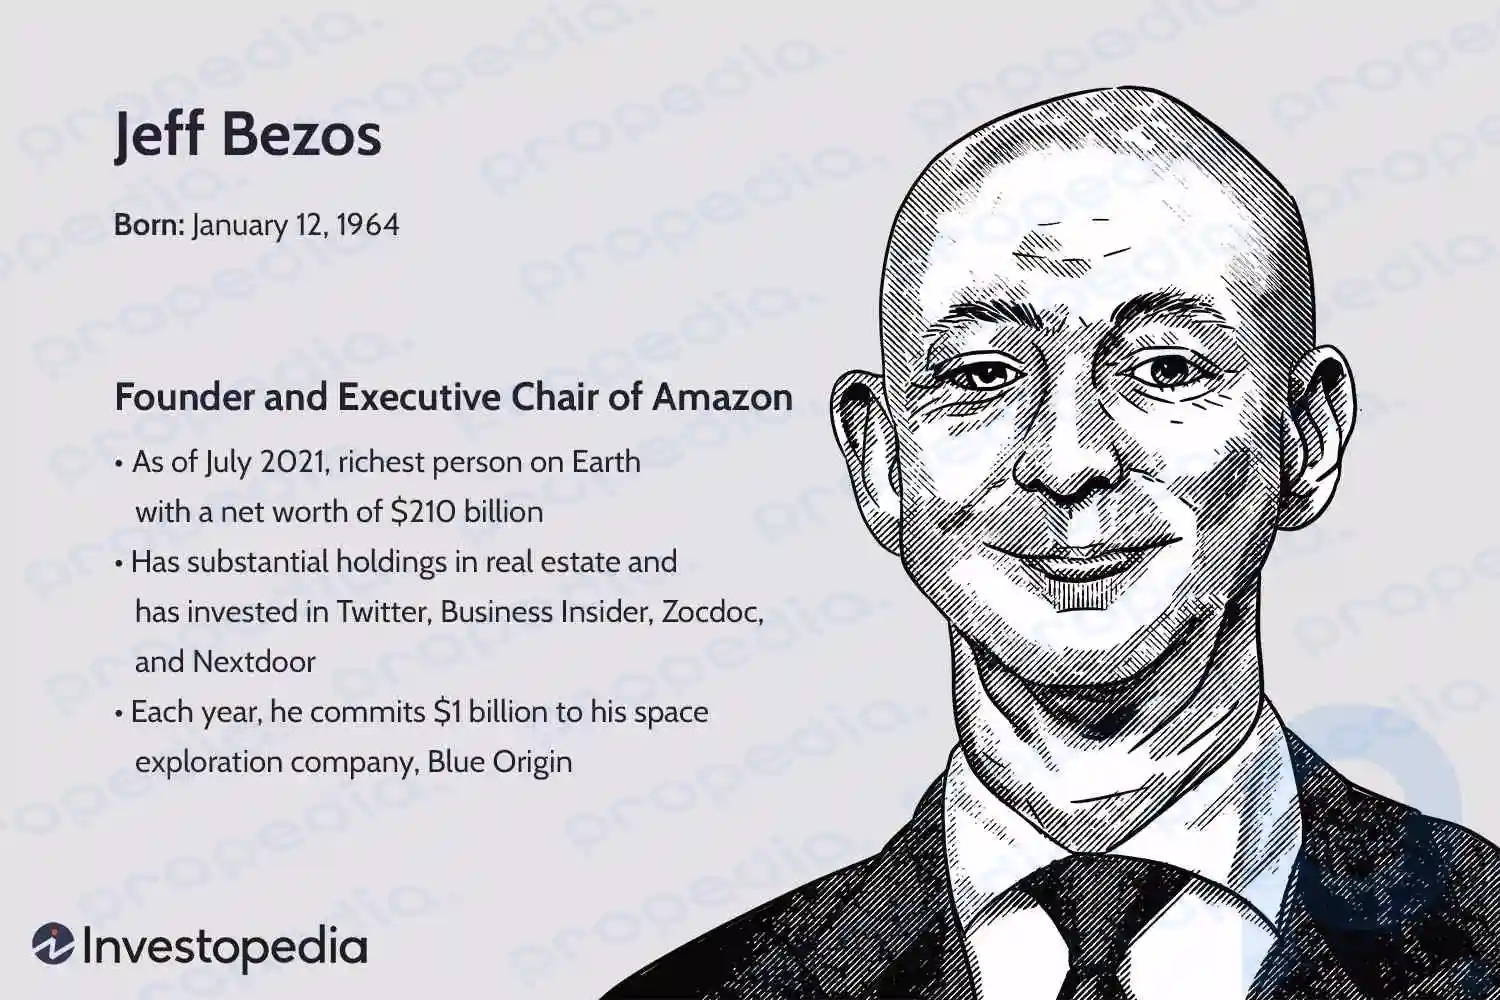 How Jeff Bezos Became One of the World’s Richest People / ZAMONA